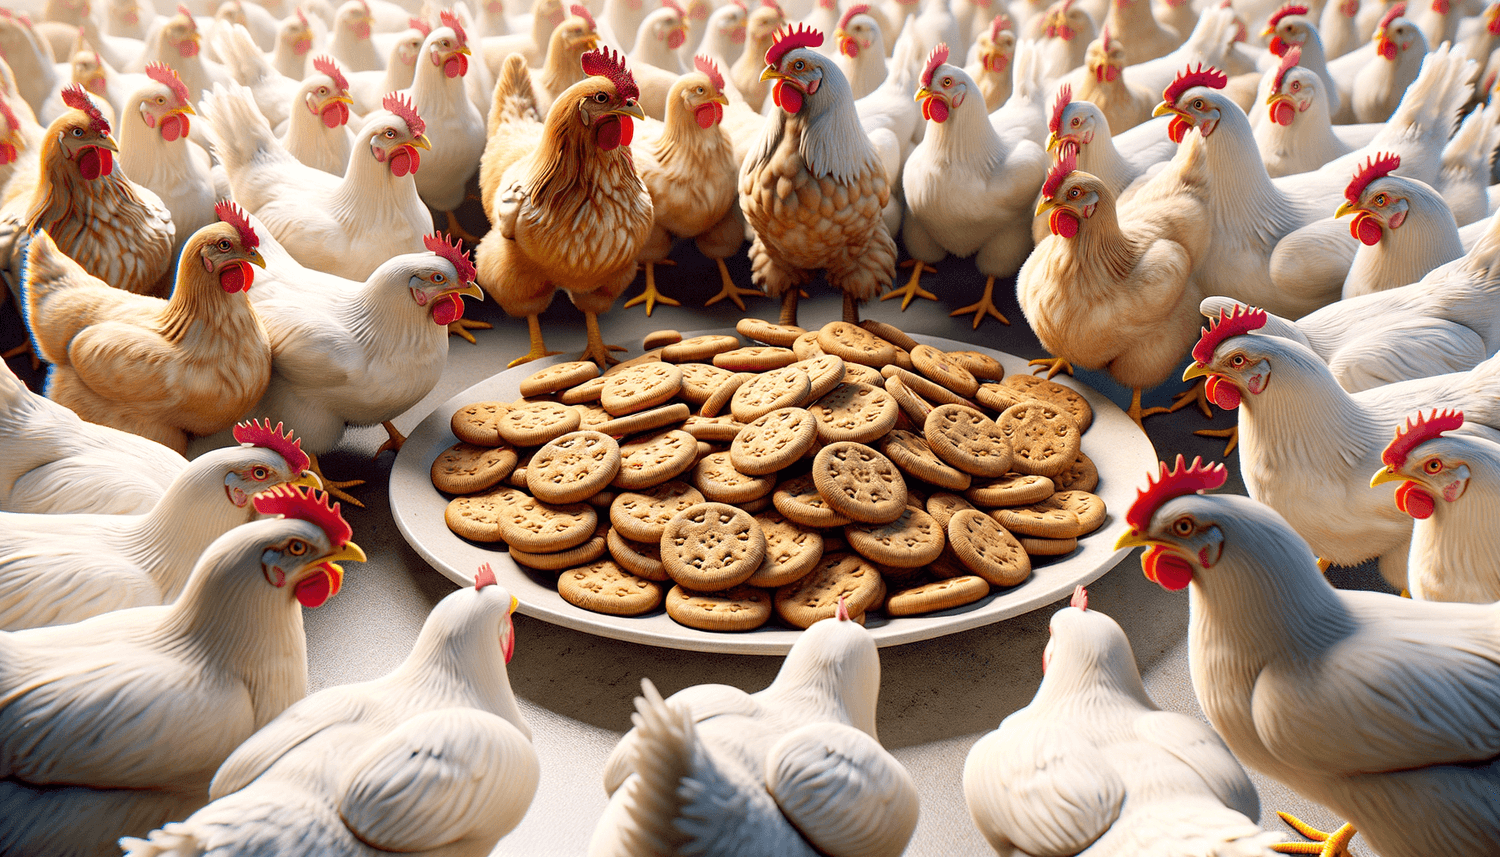 Can Chickens Eat Dog Biscuits?